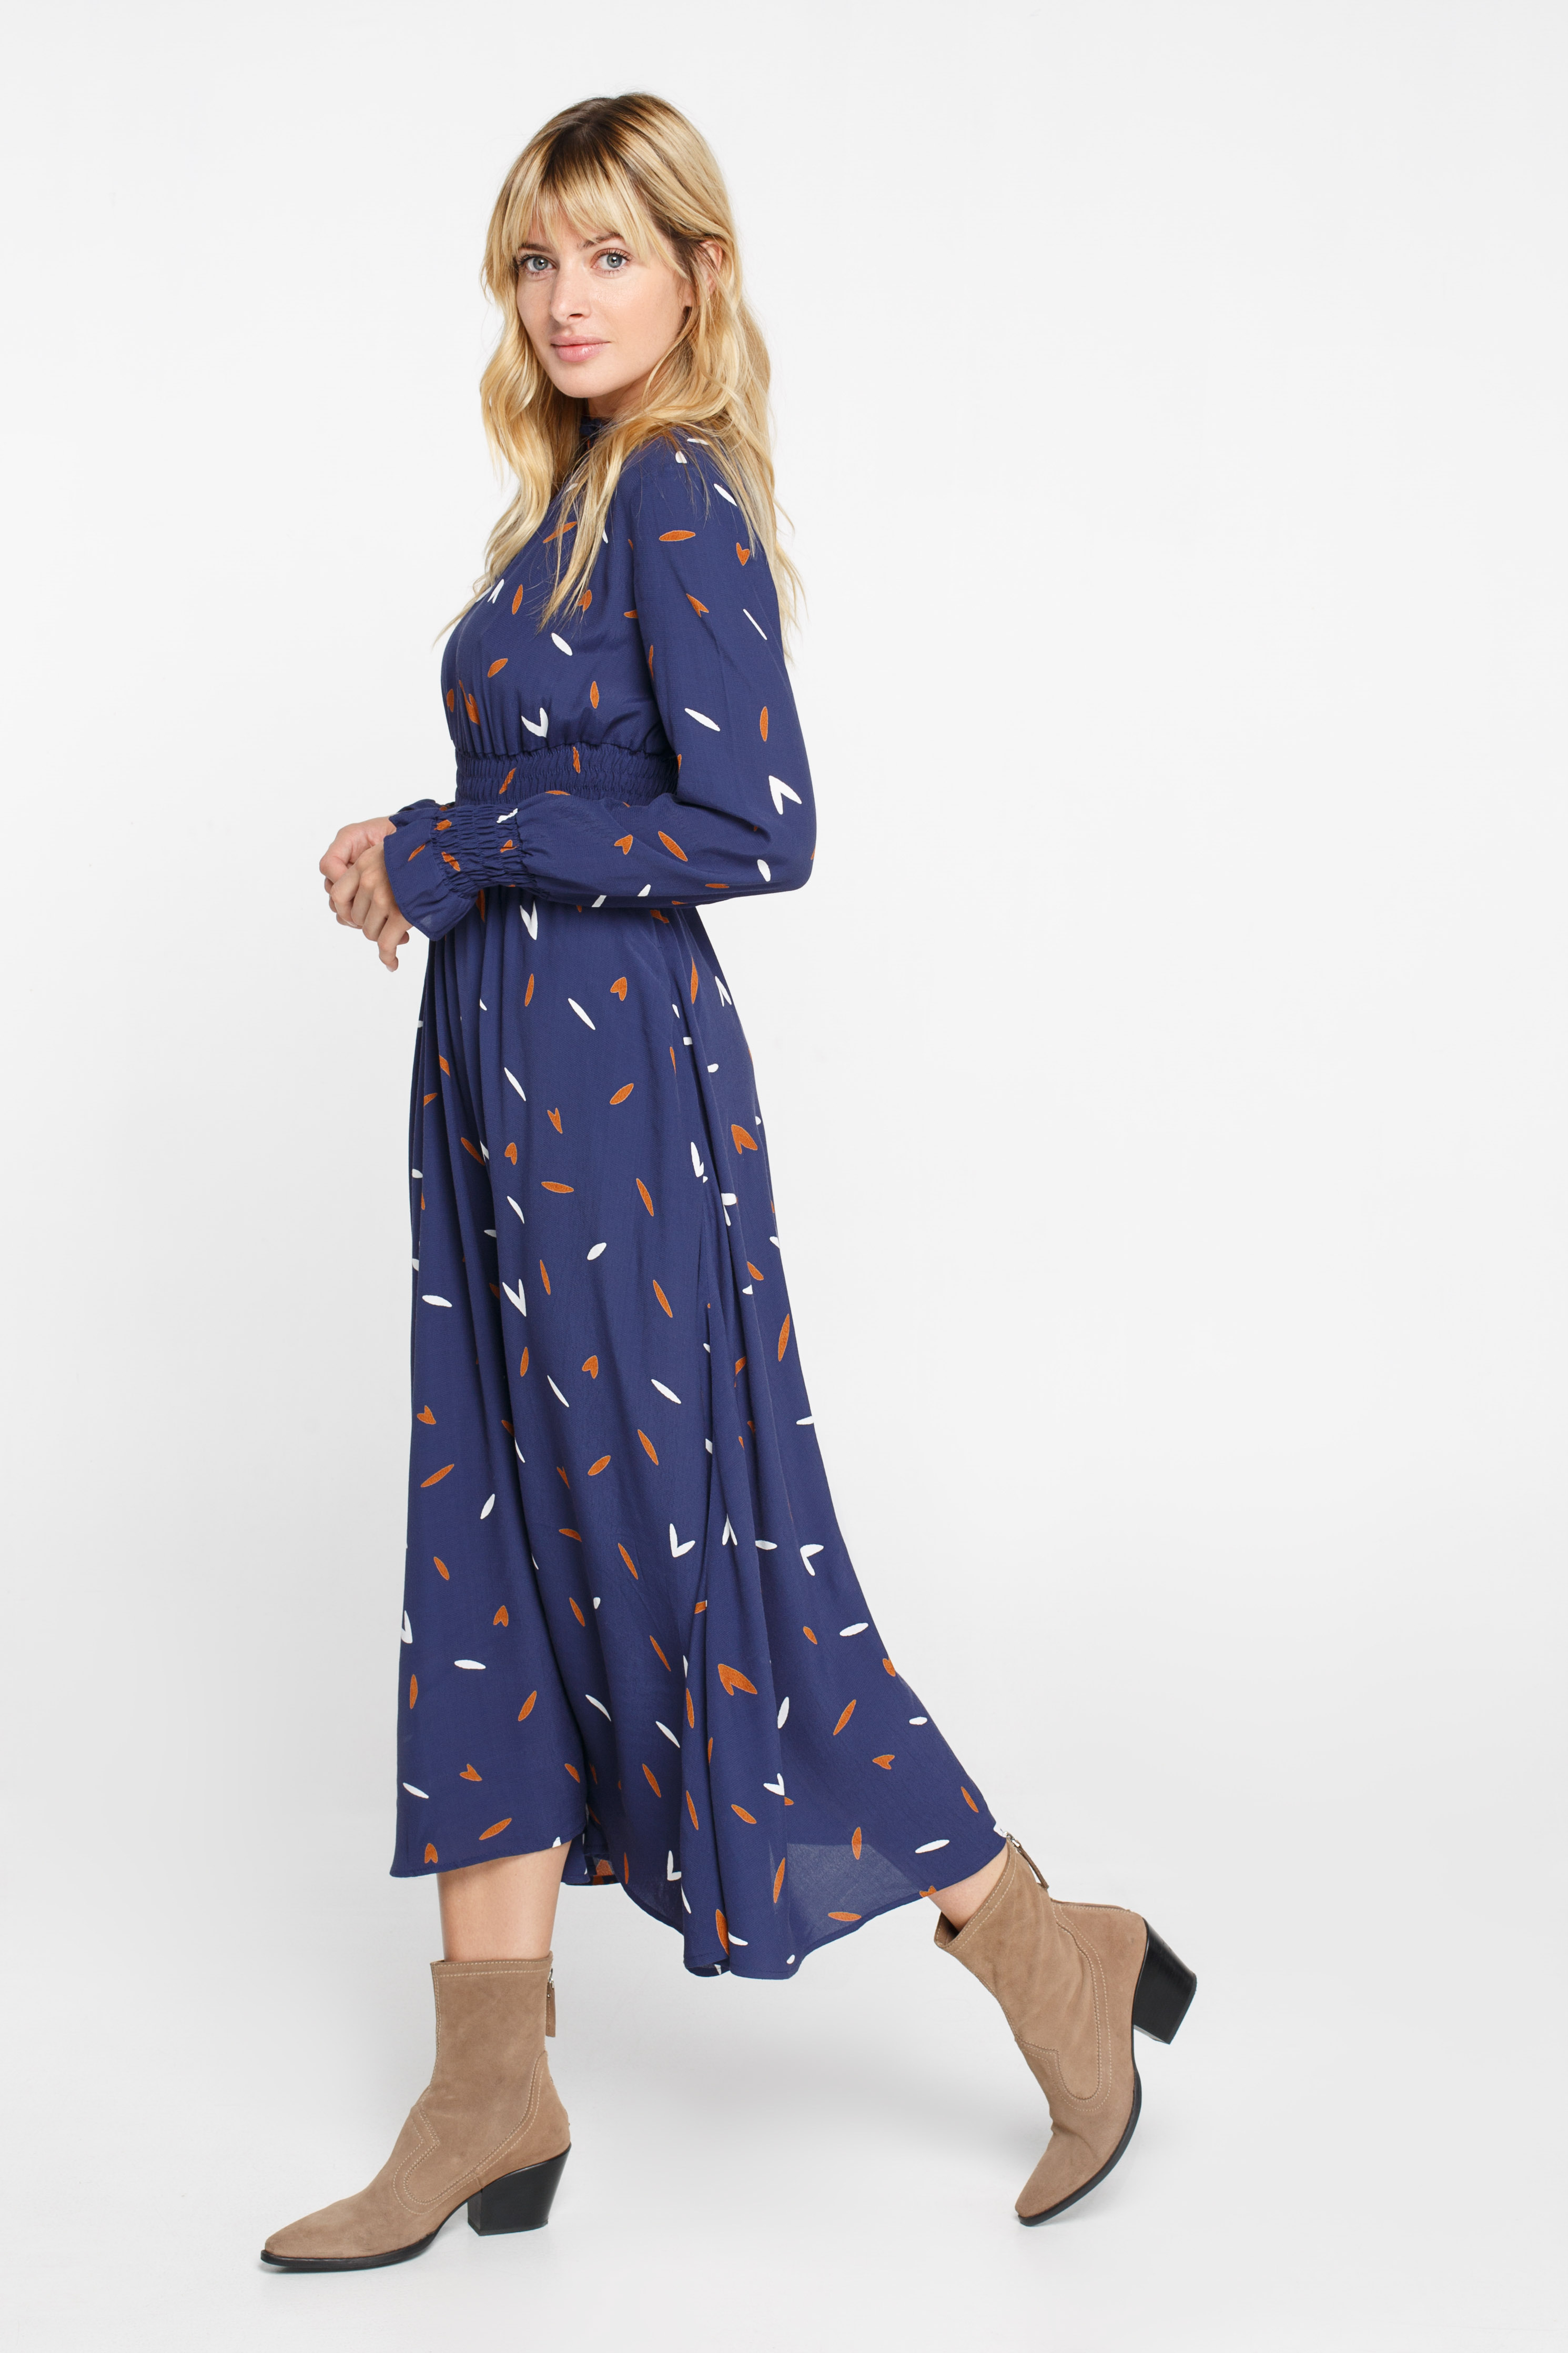 Blue midi dress with elastic waistband and white-brown leaves pattern, photo 3